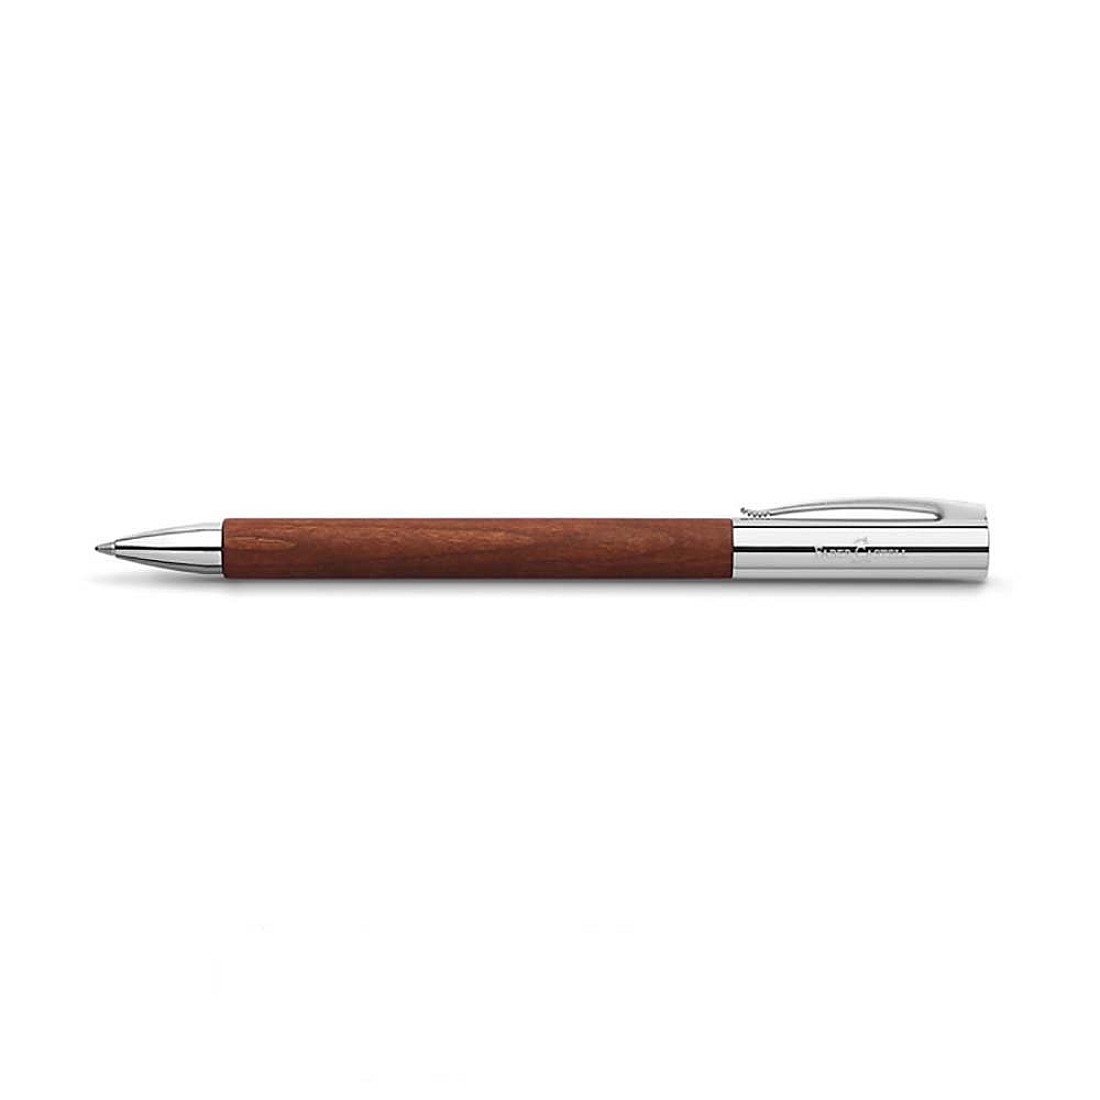 Faber-Castell Ambition Pearwood Ballpoint